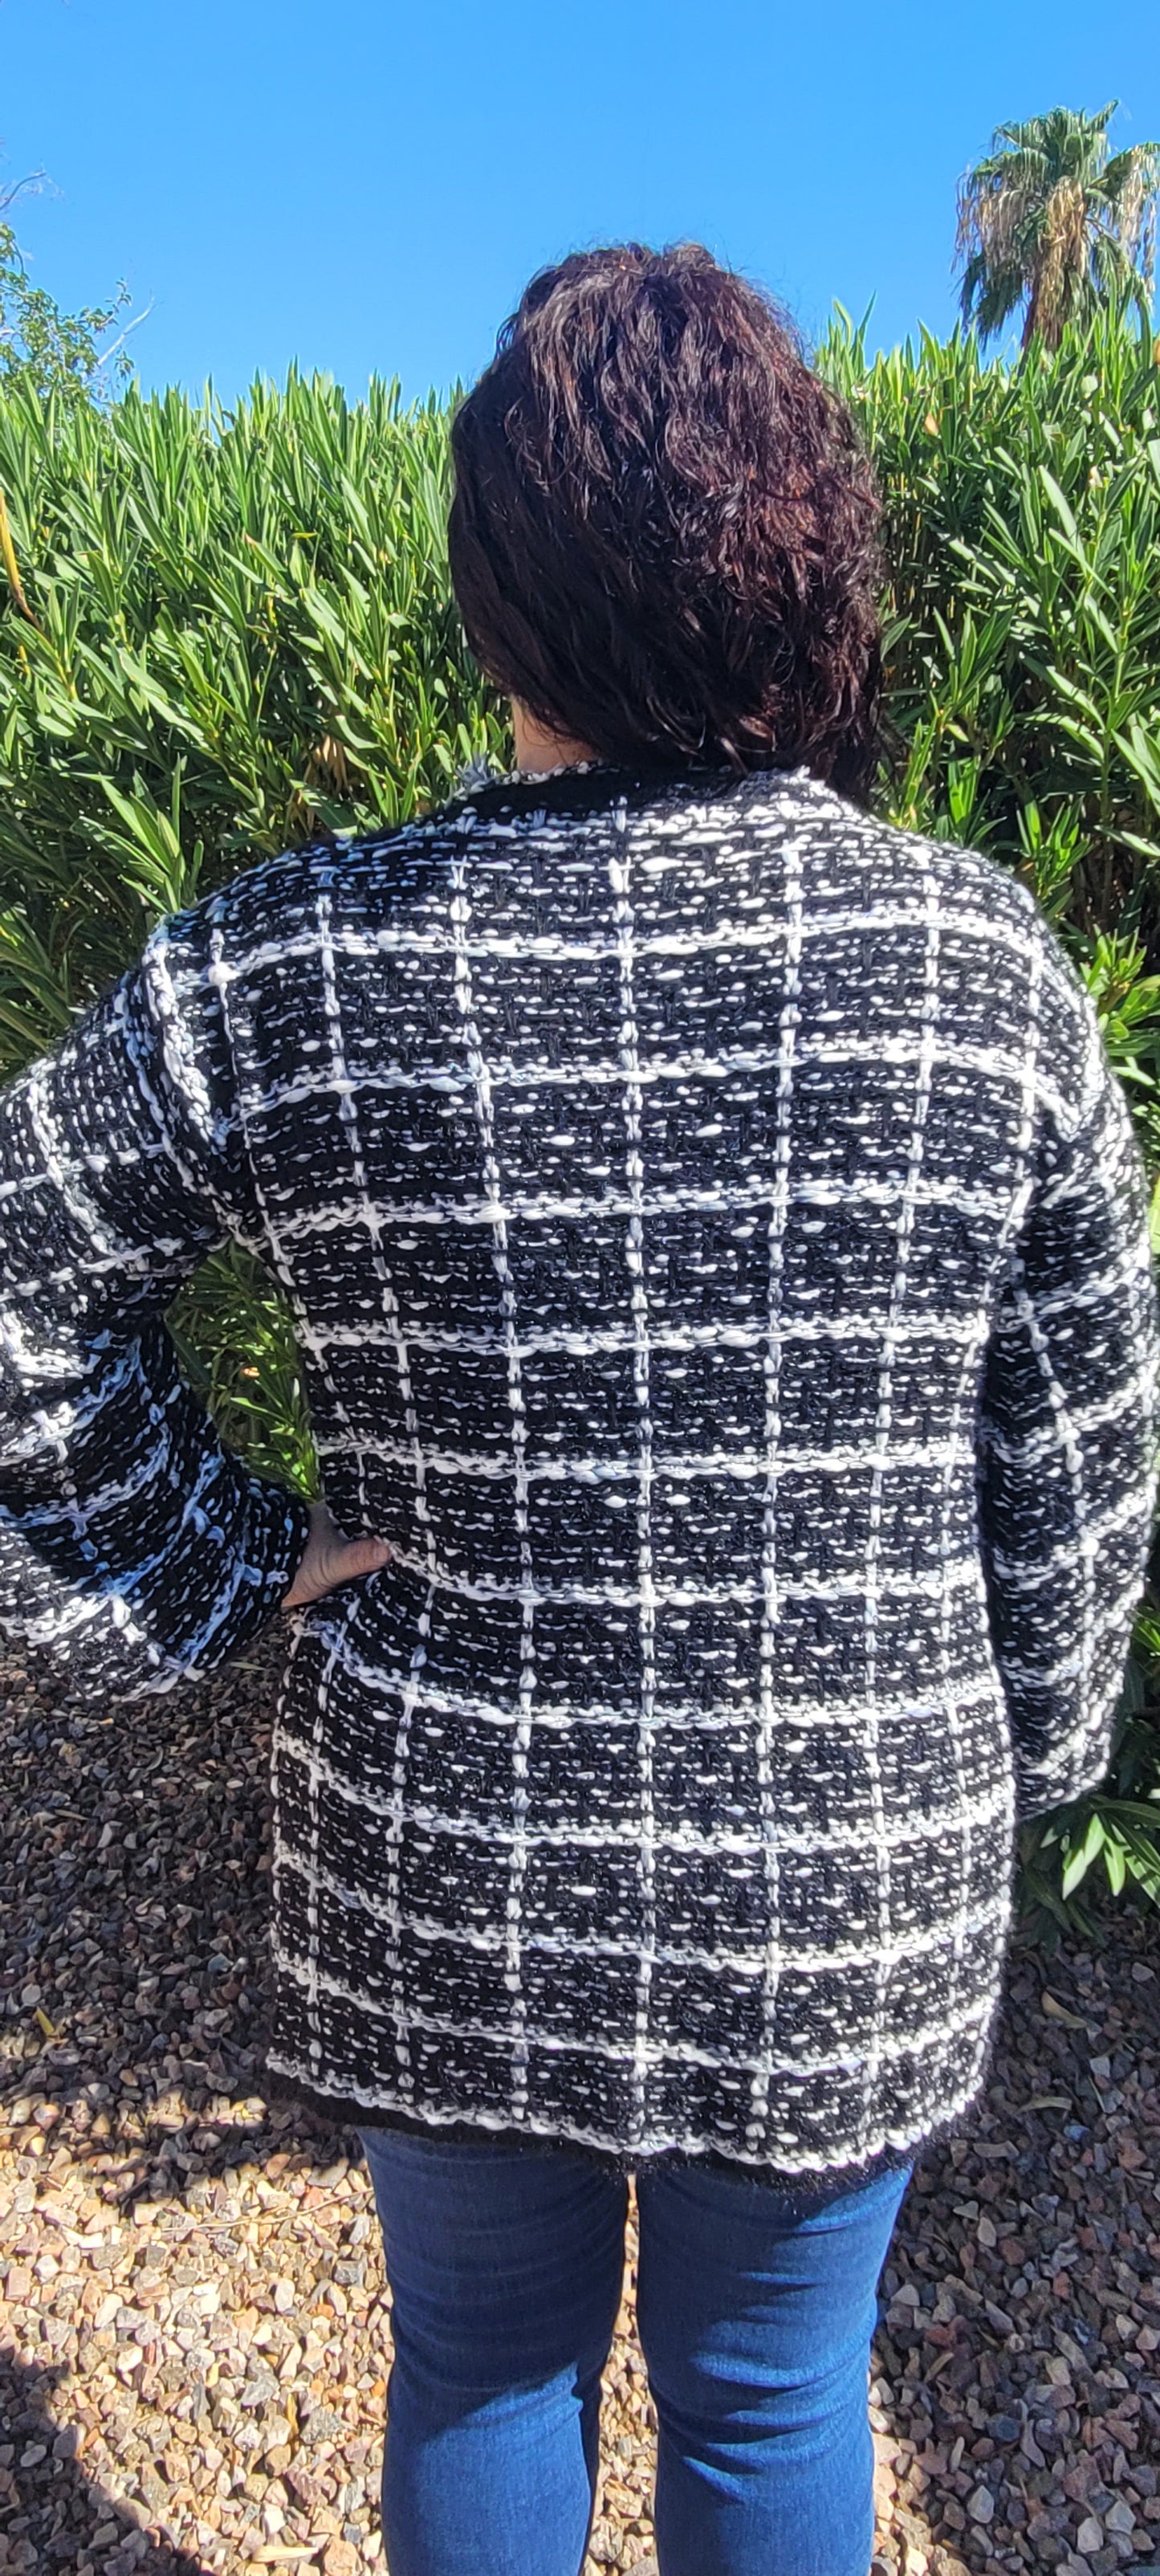 “Check Mate” is a loose cable knit cardigan sweater, which features an open front, an eyelet hook at the bust, two functional pockets that are open at the top, balloon sleeves with elastic cuffs, frayed trim on neckline and front. The colors are black, white, and gray. This sweater is so soft and comfy. This cute number can be used as a jacket or sweater. Sizes small through large.